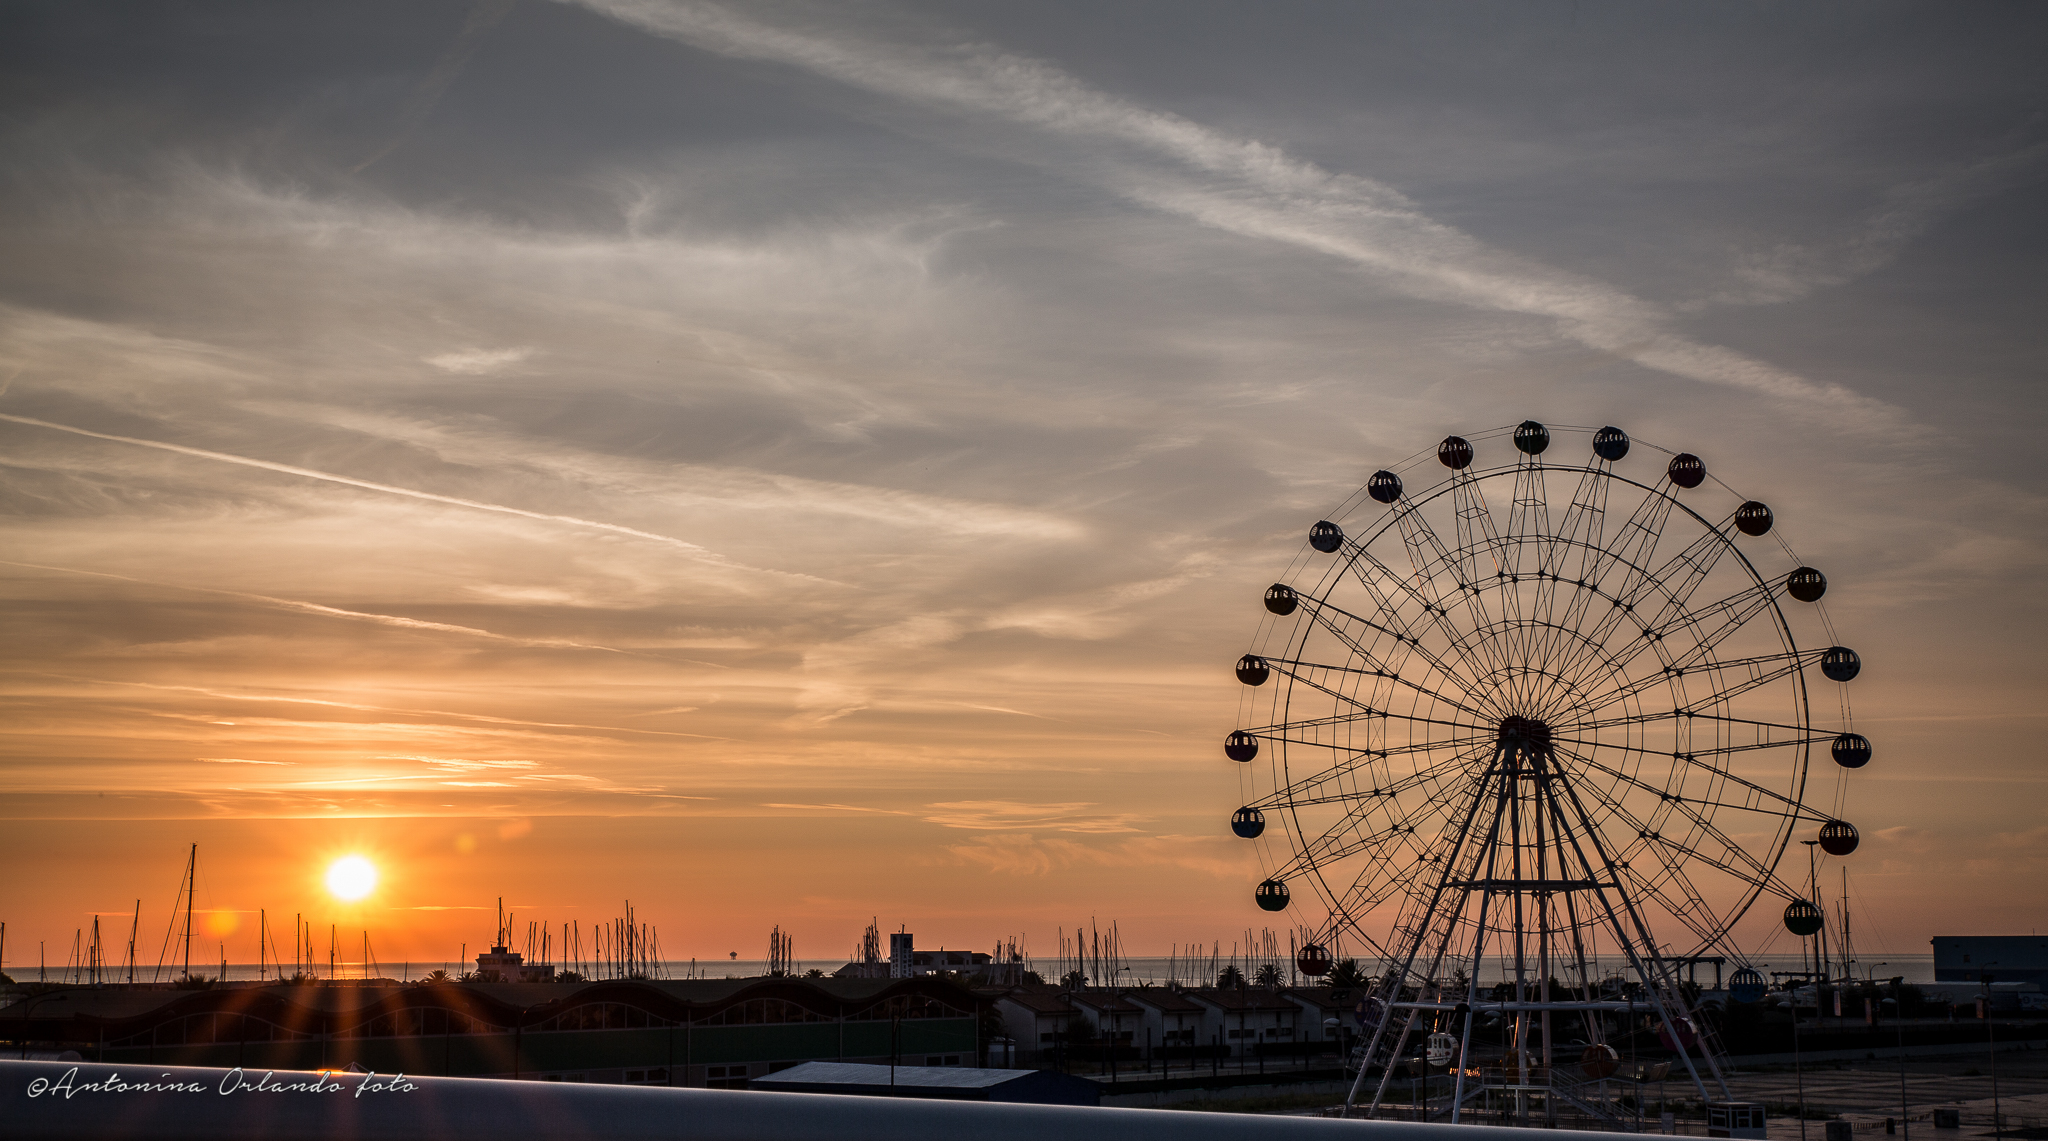 The wheel and dawn....